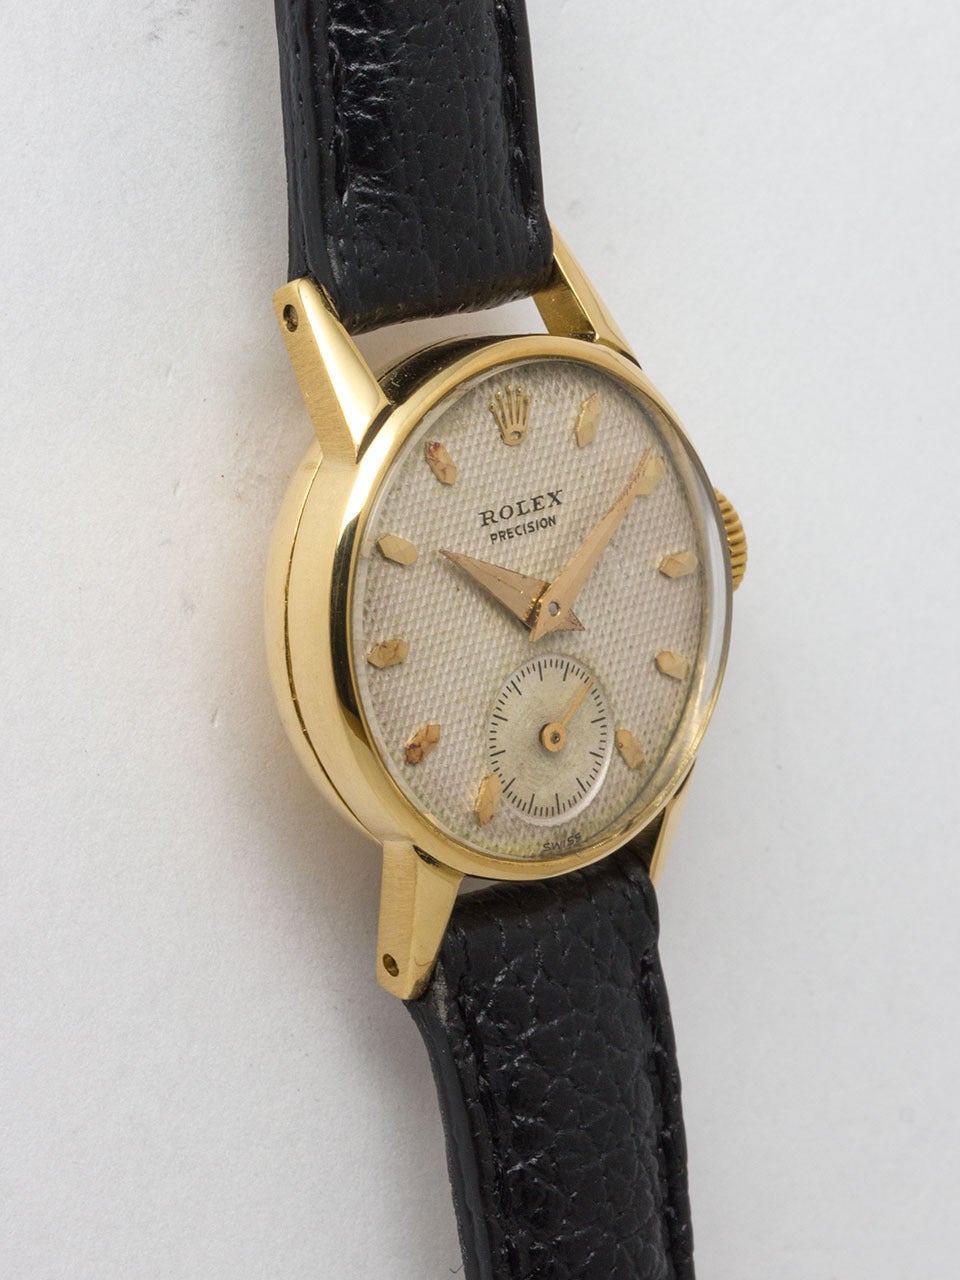 Rolex 18K Yellow Gold Lady's Precision Wristwatch ref 4779 circa 1953. 20 x 27mm snap back case with extended lugs. Original lightly patina'd textured dial with applied gold markers and tapered sword hands. Powered by 17 jewel manual wind movement